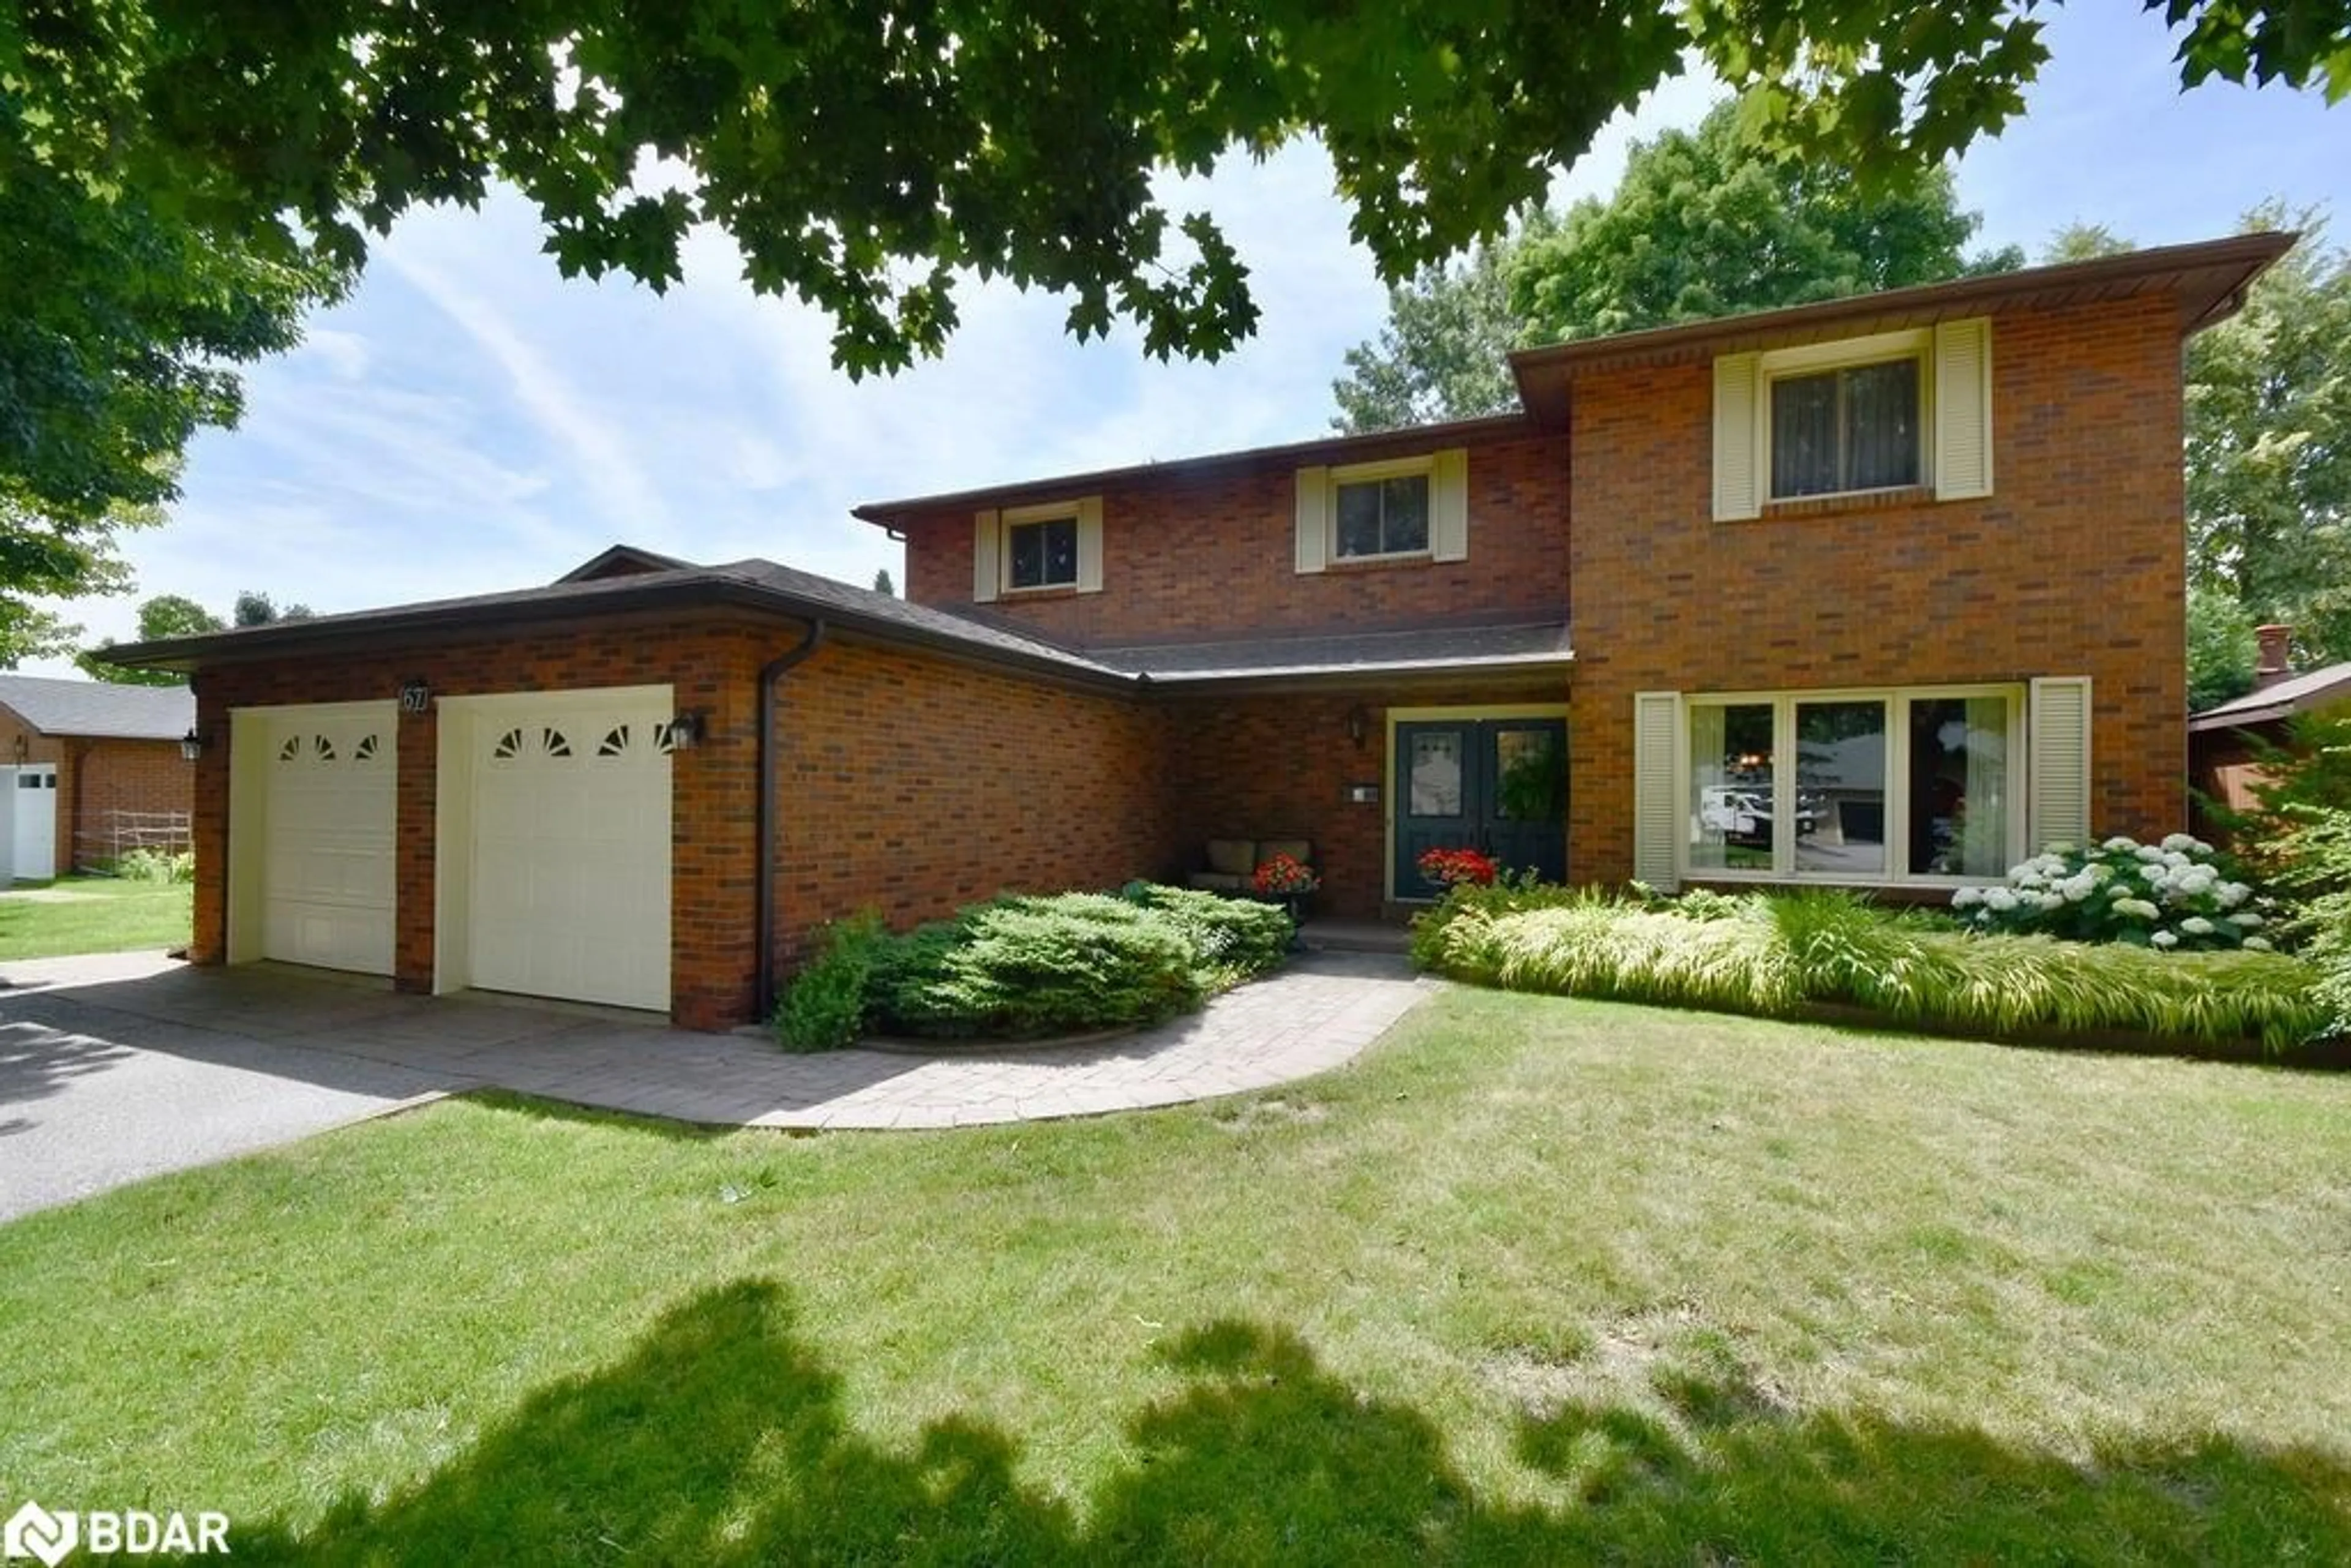 Home with brick exterior material for 67 Woodcrest Rd, Barrie Ontario L4N 2V6